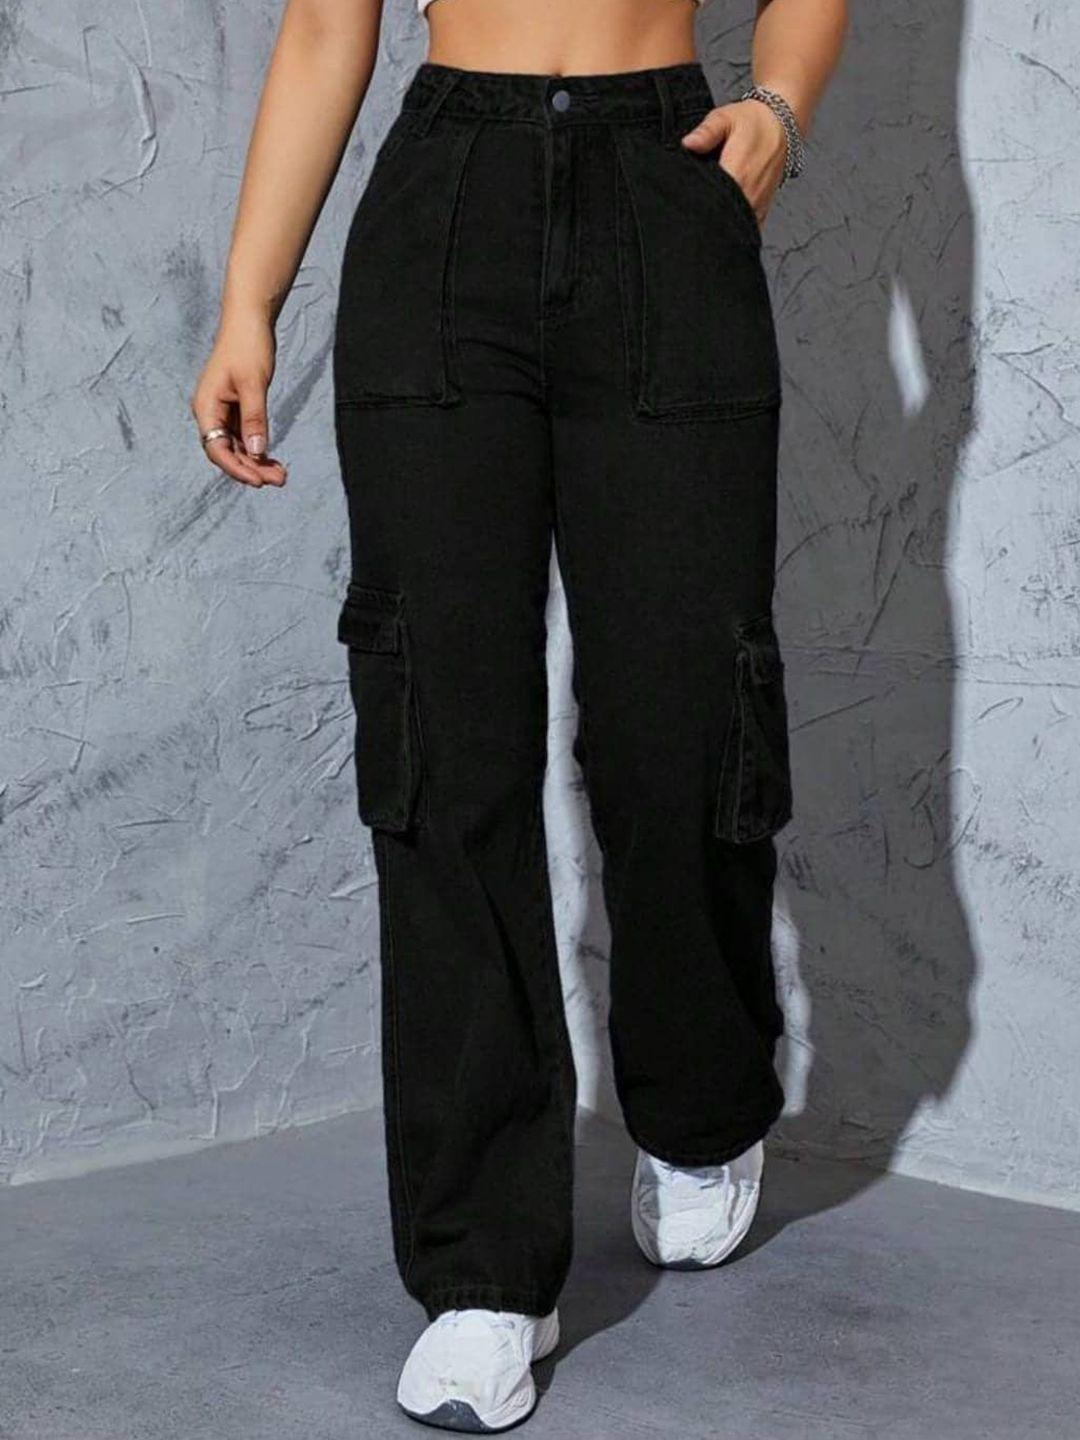 next-one-women-black-smart-wide-leg-high-rise-highly-distressed-stretchable-jeans